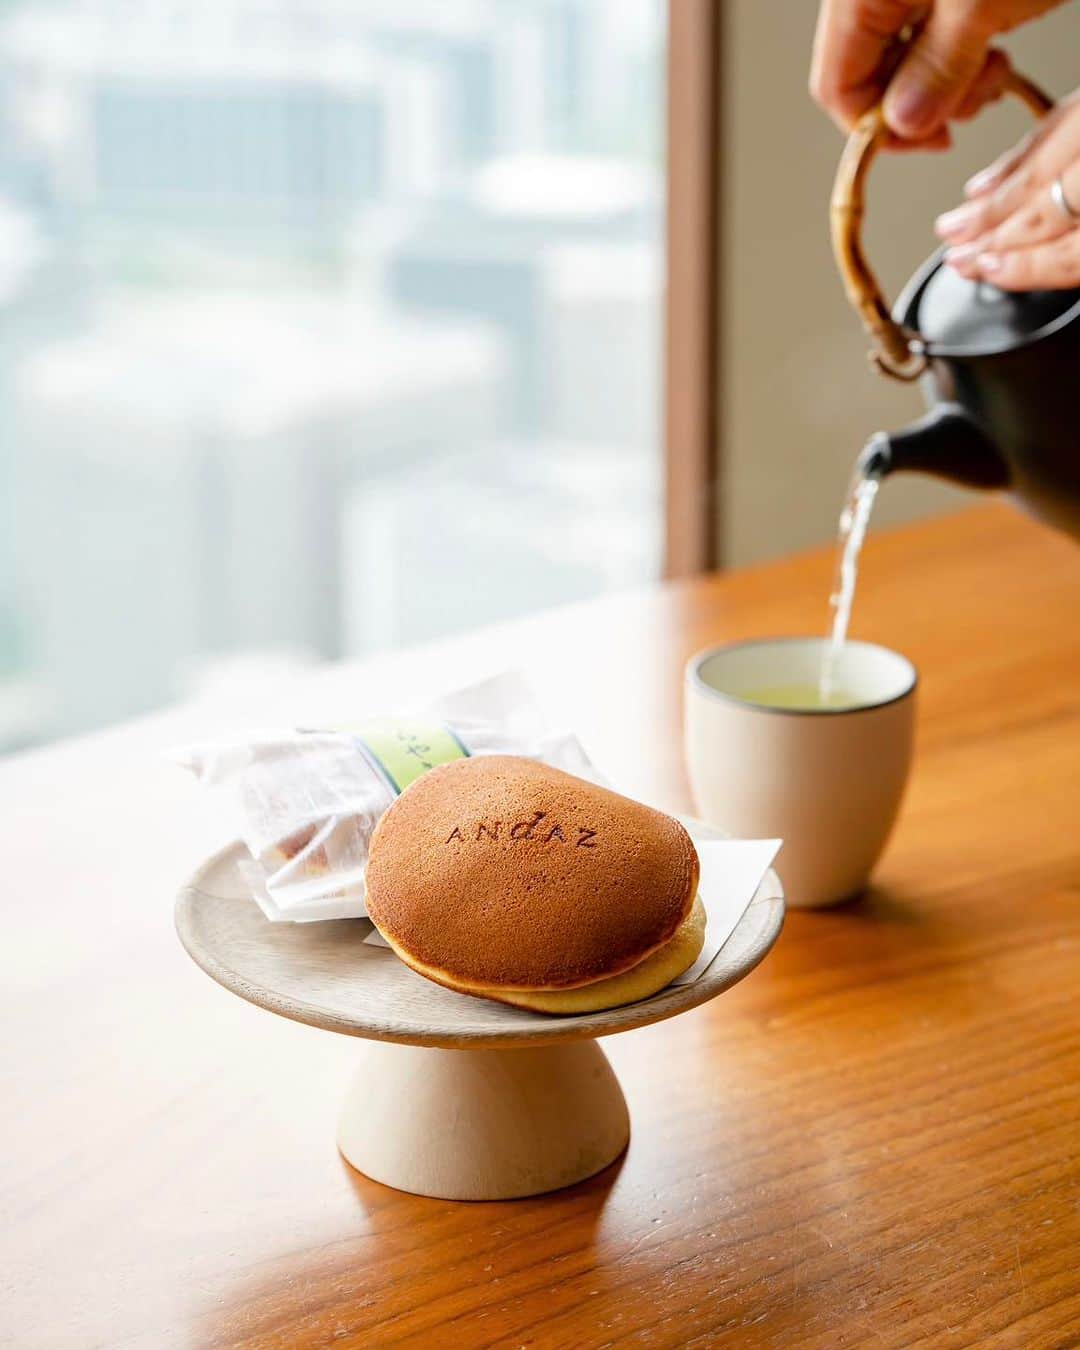 Andaz Tokyo アンダーズ 東京のインスタグラム：「灼熱の東京で涼をとるステイケーションはいかが？スタンダードルームでも、都内最大級を誇る広々とした客室でのお部屋でのティータイムがおすすめです。全ての客室でミニバーのソフトドリンクやコーヒー、お茶を無料でお楽しみいただけます🍵  For this summer, how about a staycation in the city and get refreshed at Andaz Tokyo? Take a break from the heat with a relaxing teatime in our rooms, among the most spacious in Tokyo. Soft drinks from the minibar, coffee and tea are complimentary for all rooms!🍵  #東京ホテル #絶景ホテル #ホテルステイ #ライフスタイルホテル #ラグジュアリーホテル #lifestylehotel #虎ノ門ヒルズ #ステイケーション #toranomonhills #アンダーズ東京 #andaztokyo #beautifulhotels #tokyohotel #toranomon #luxuryhotel #tokyo #japan #staycation」